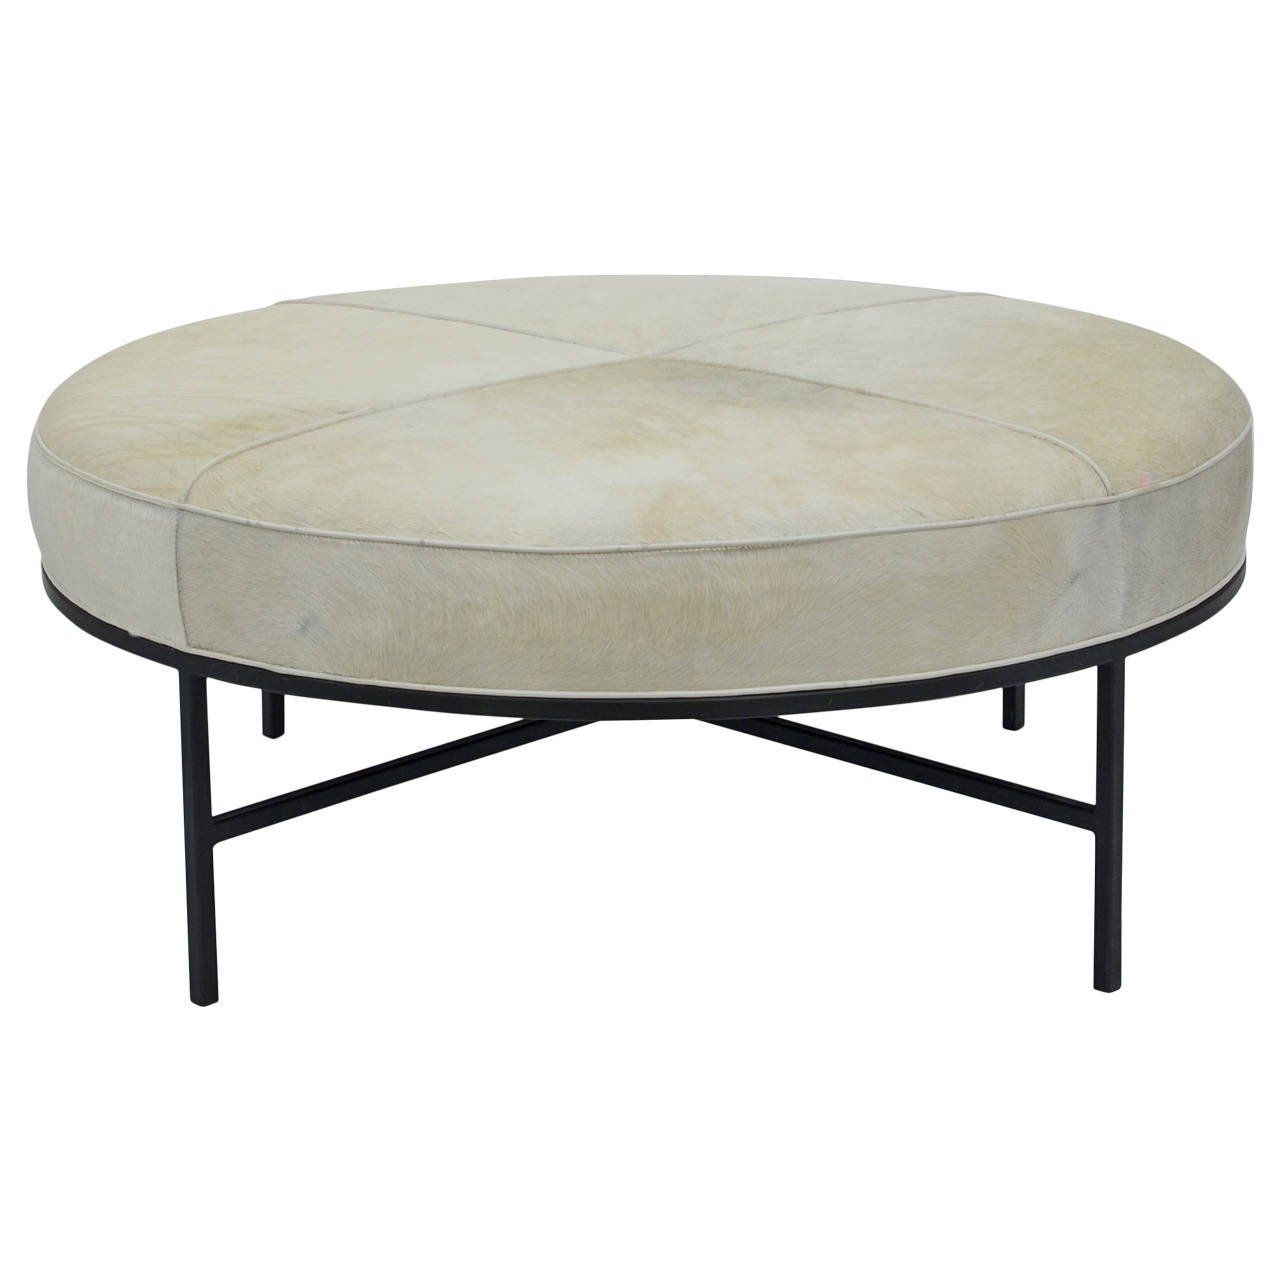 Chic White Hide And Blackened Steel Round Ottoman | From A Unique With White Large Round Ottomans (View 5 of 20)